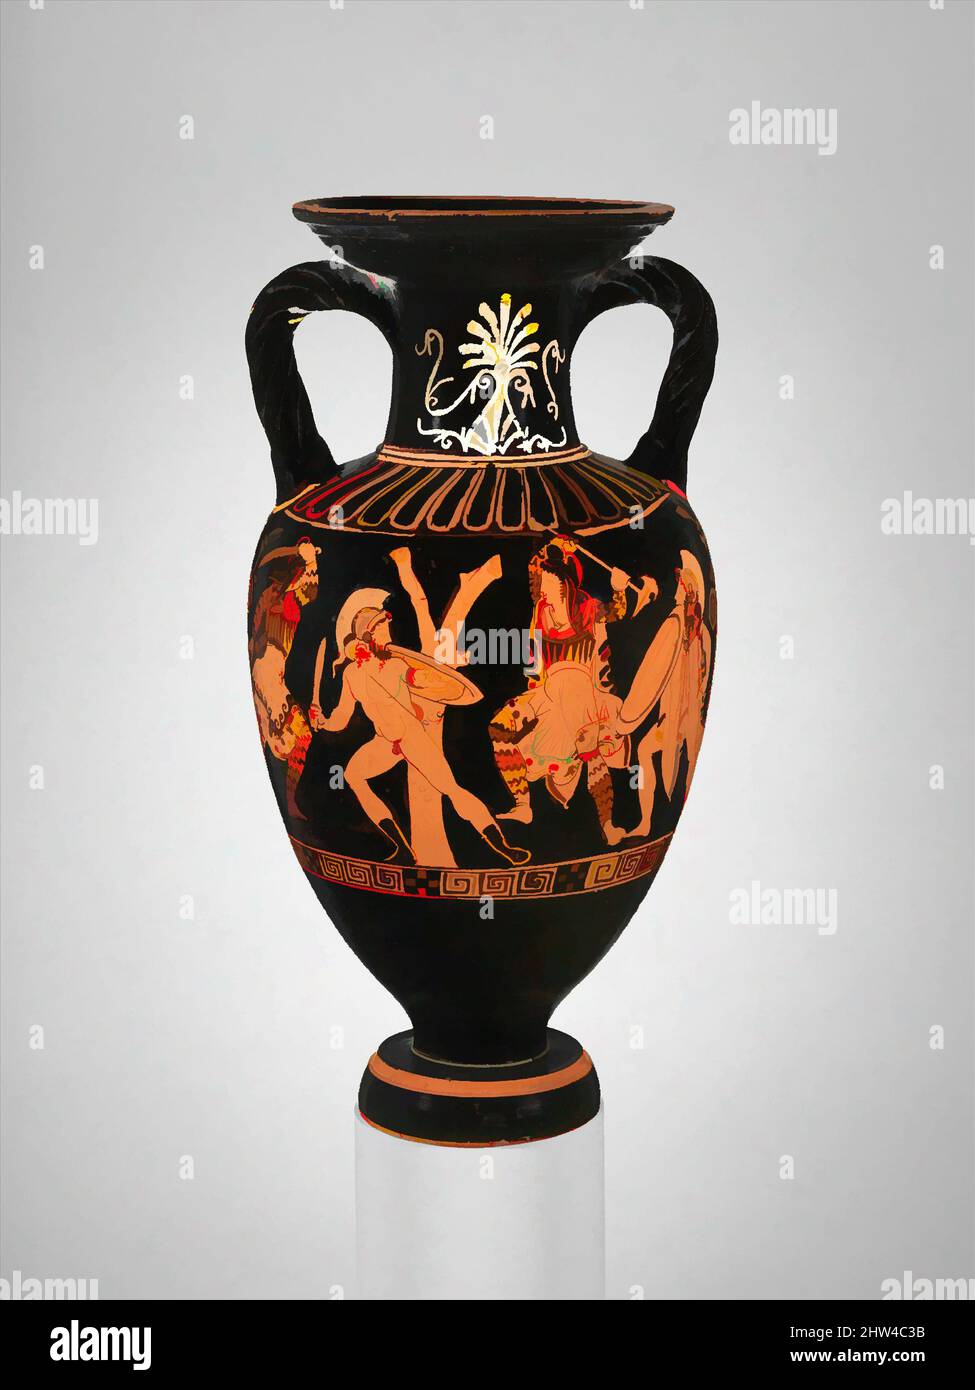 Art inspired by Terracotta neck-amphora (jar) with twisted handles, Classical, ca. 400 B.C., Greek, Attic, Terracotta; red-figure, H. 14 1/16 in. (35.8 cm), Vases, Obverse, combat of Greeks against Amazons, Reverse, three youths. This vase is complementary in its main scene to the, Classic works modernized by Artotop with a splash of modernity. Shapes, color and value, eye-catching visual impact on art. Emotions through freedom of artworks in a contemporary way. A timeless message pursuing a wildly creative new direction. Artists turning to the digital medium and creating the Artotop NFT Stock Photo